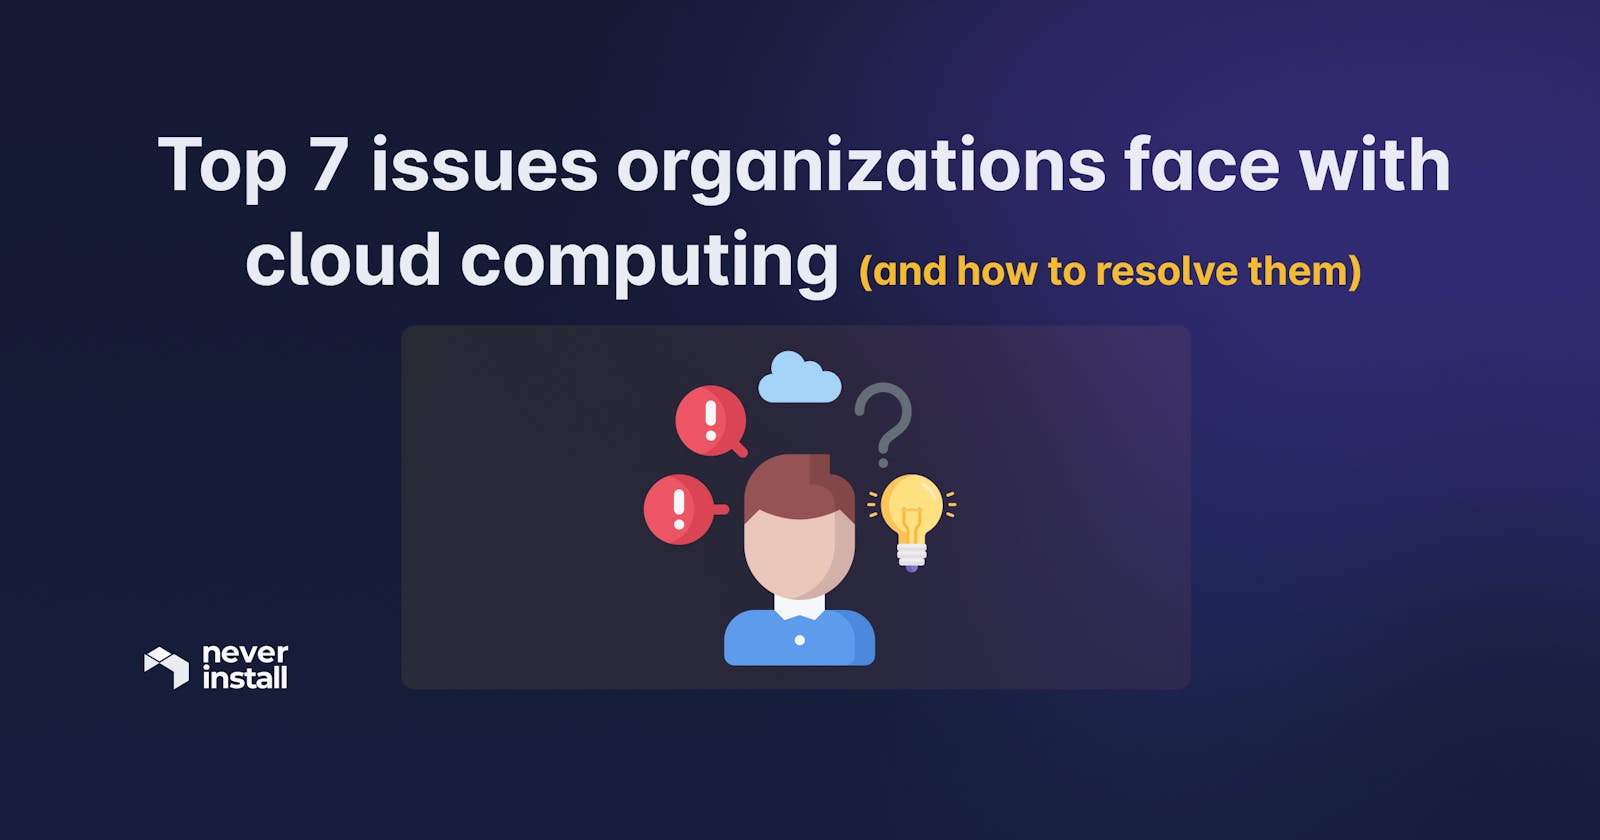 Top 7 issues organizations face with cloud computing (and how to resolve them)